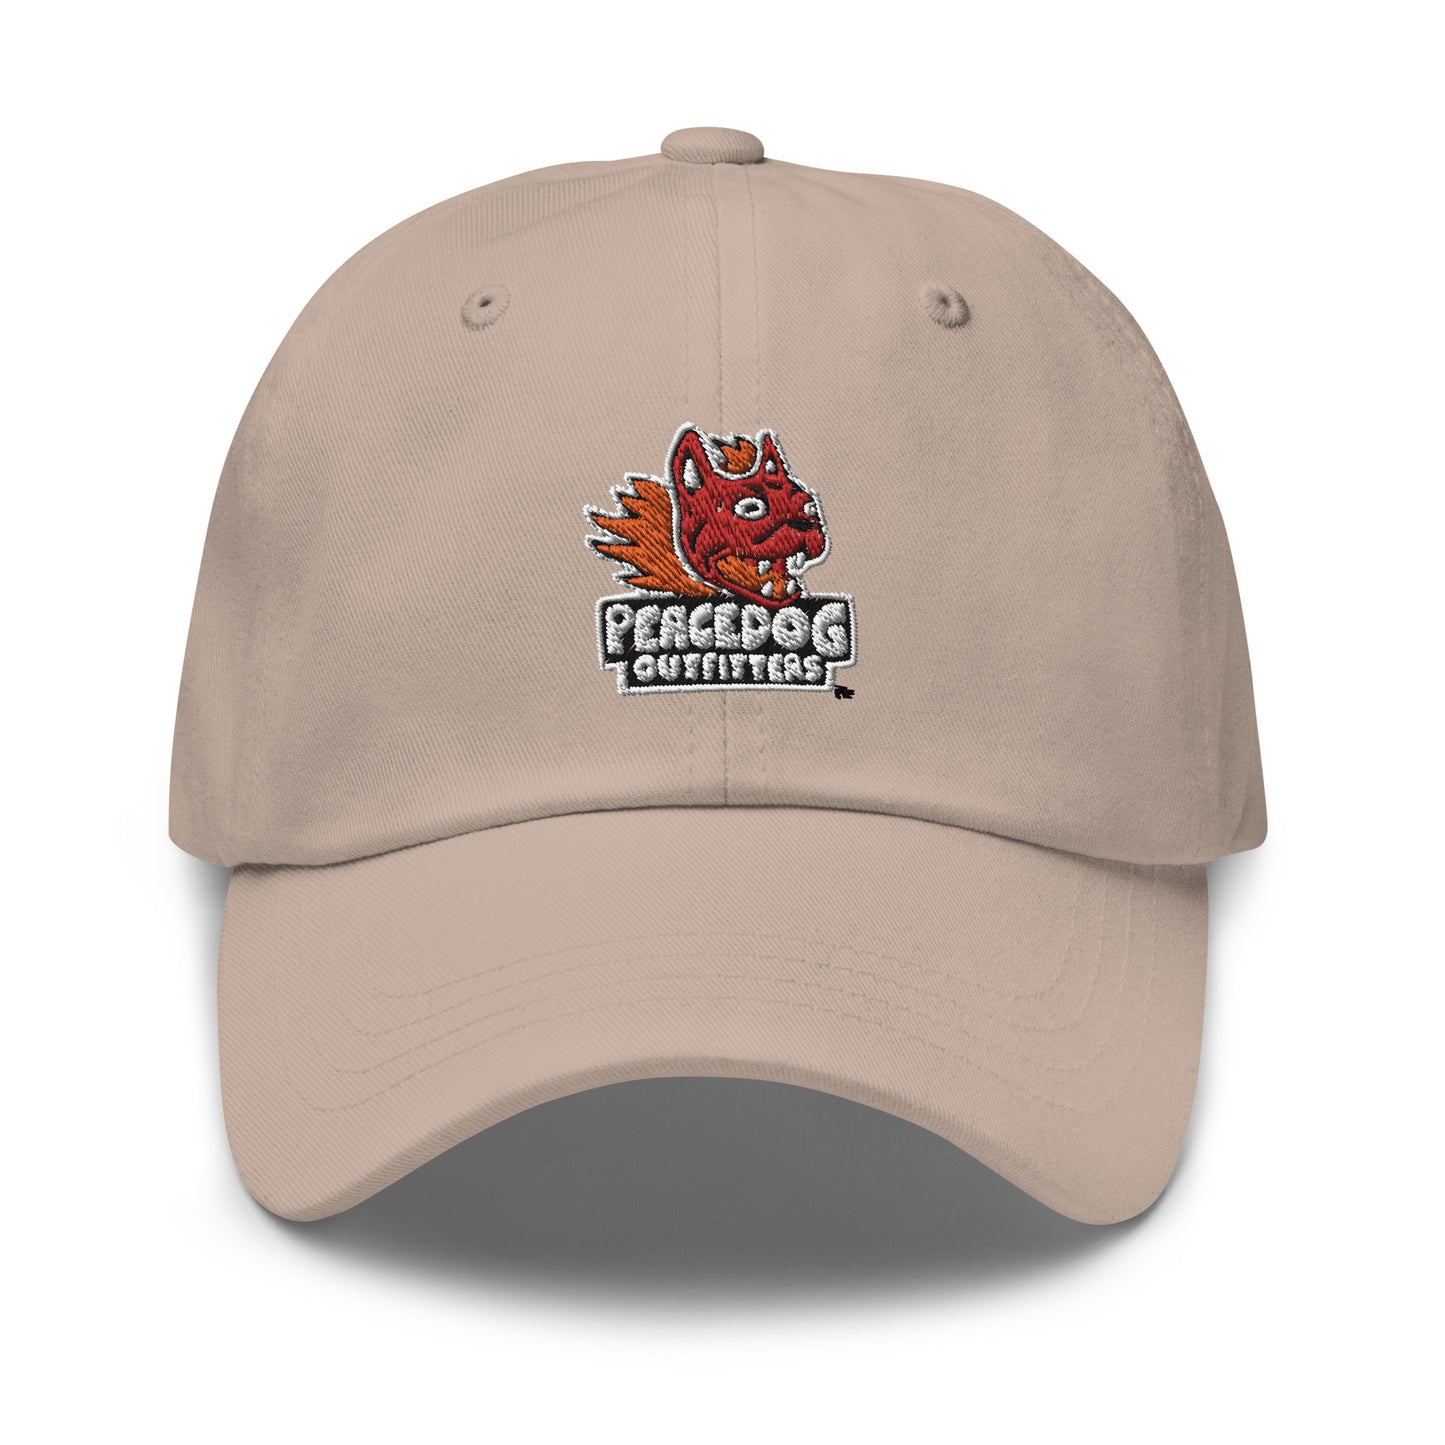 Peacedog Outfitters Dad hat